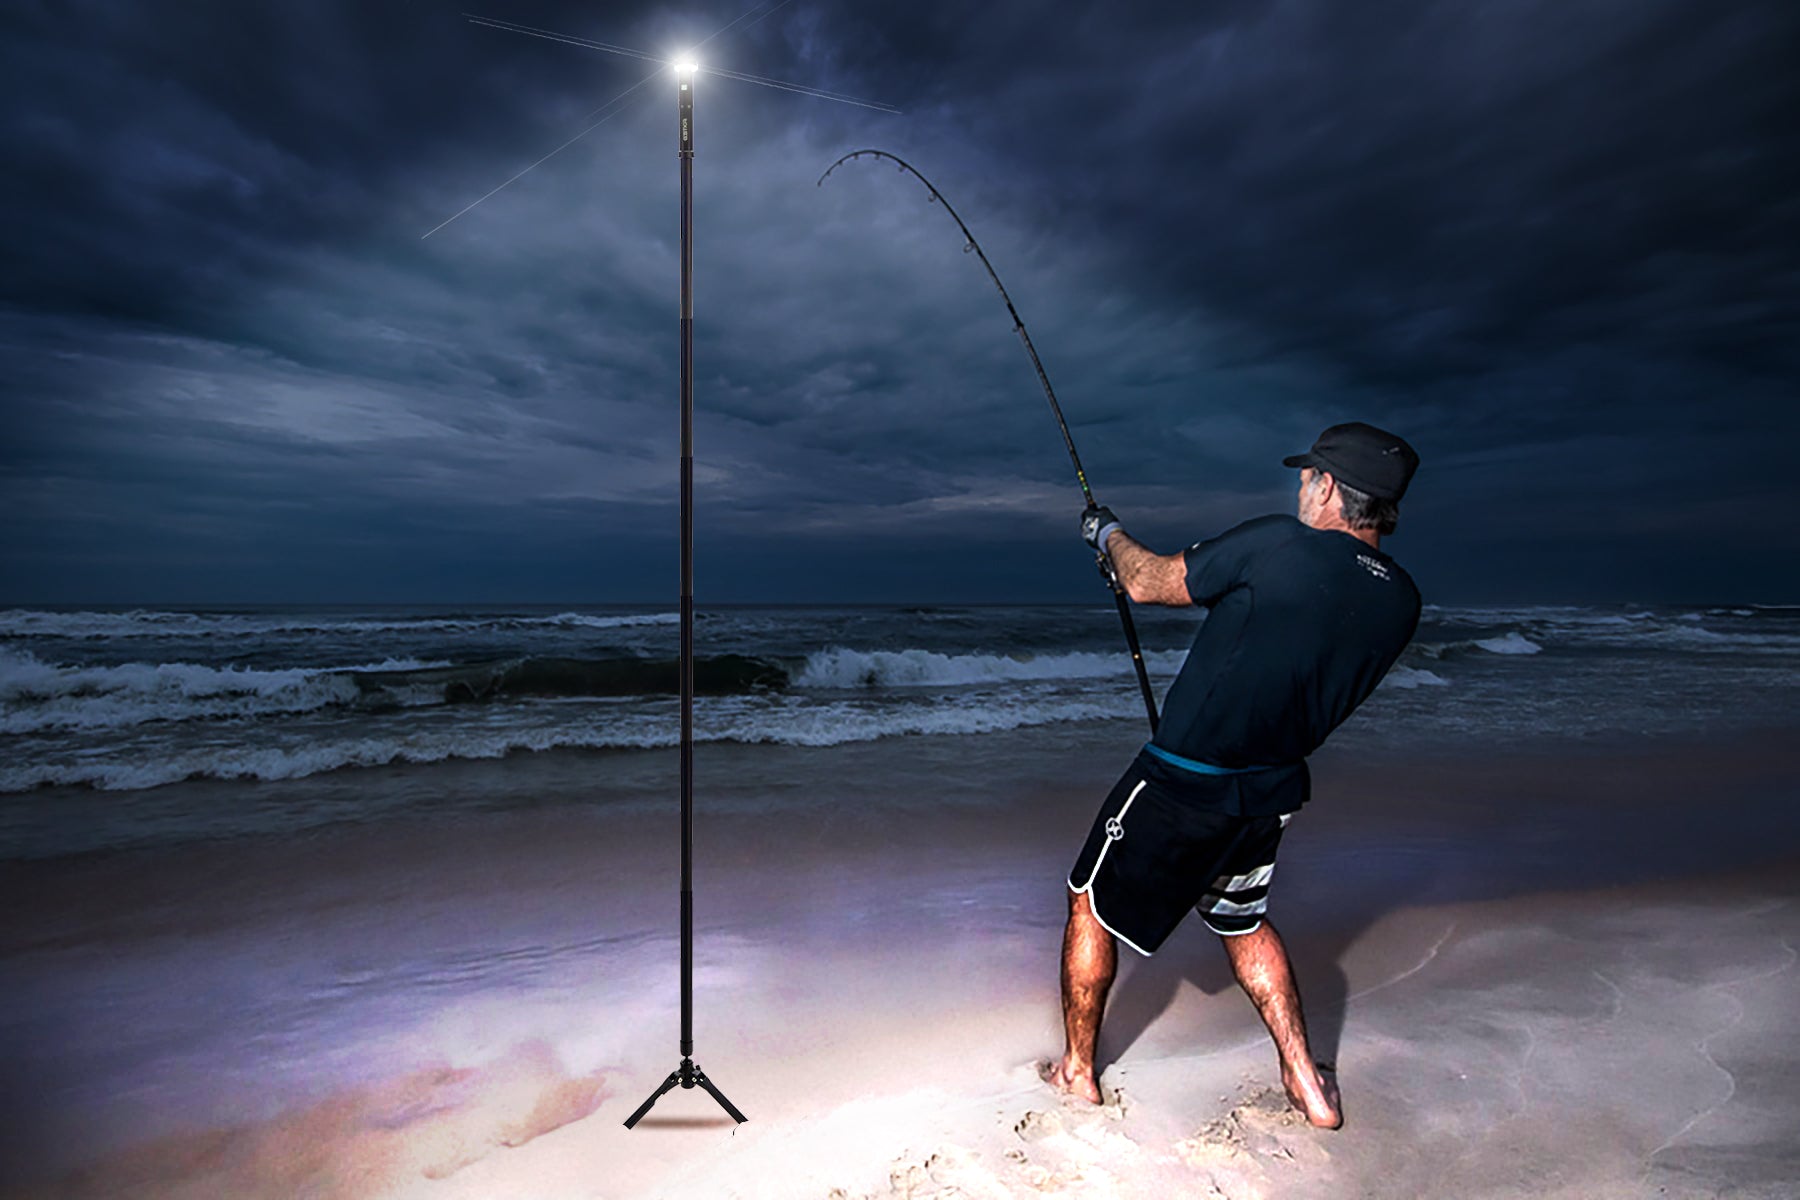 How Many Lumens Do You Need For Fishing At Night? – STKR Concepts